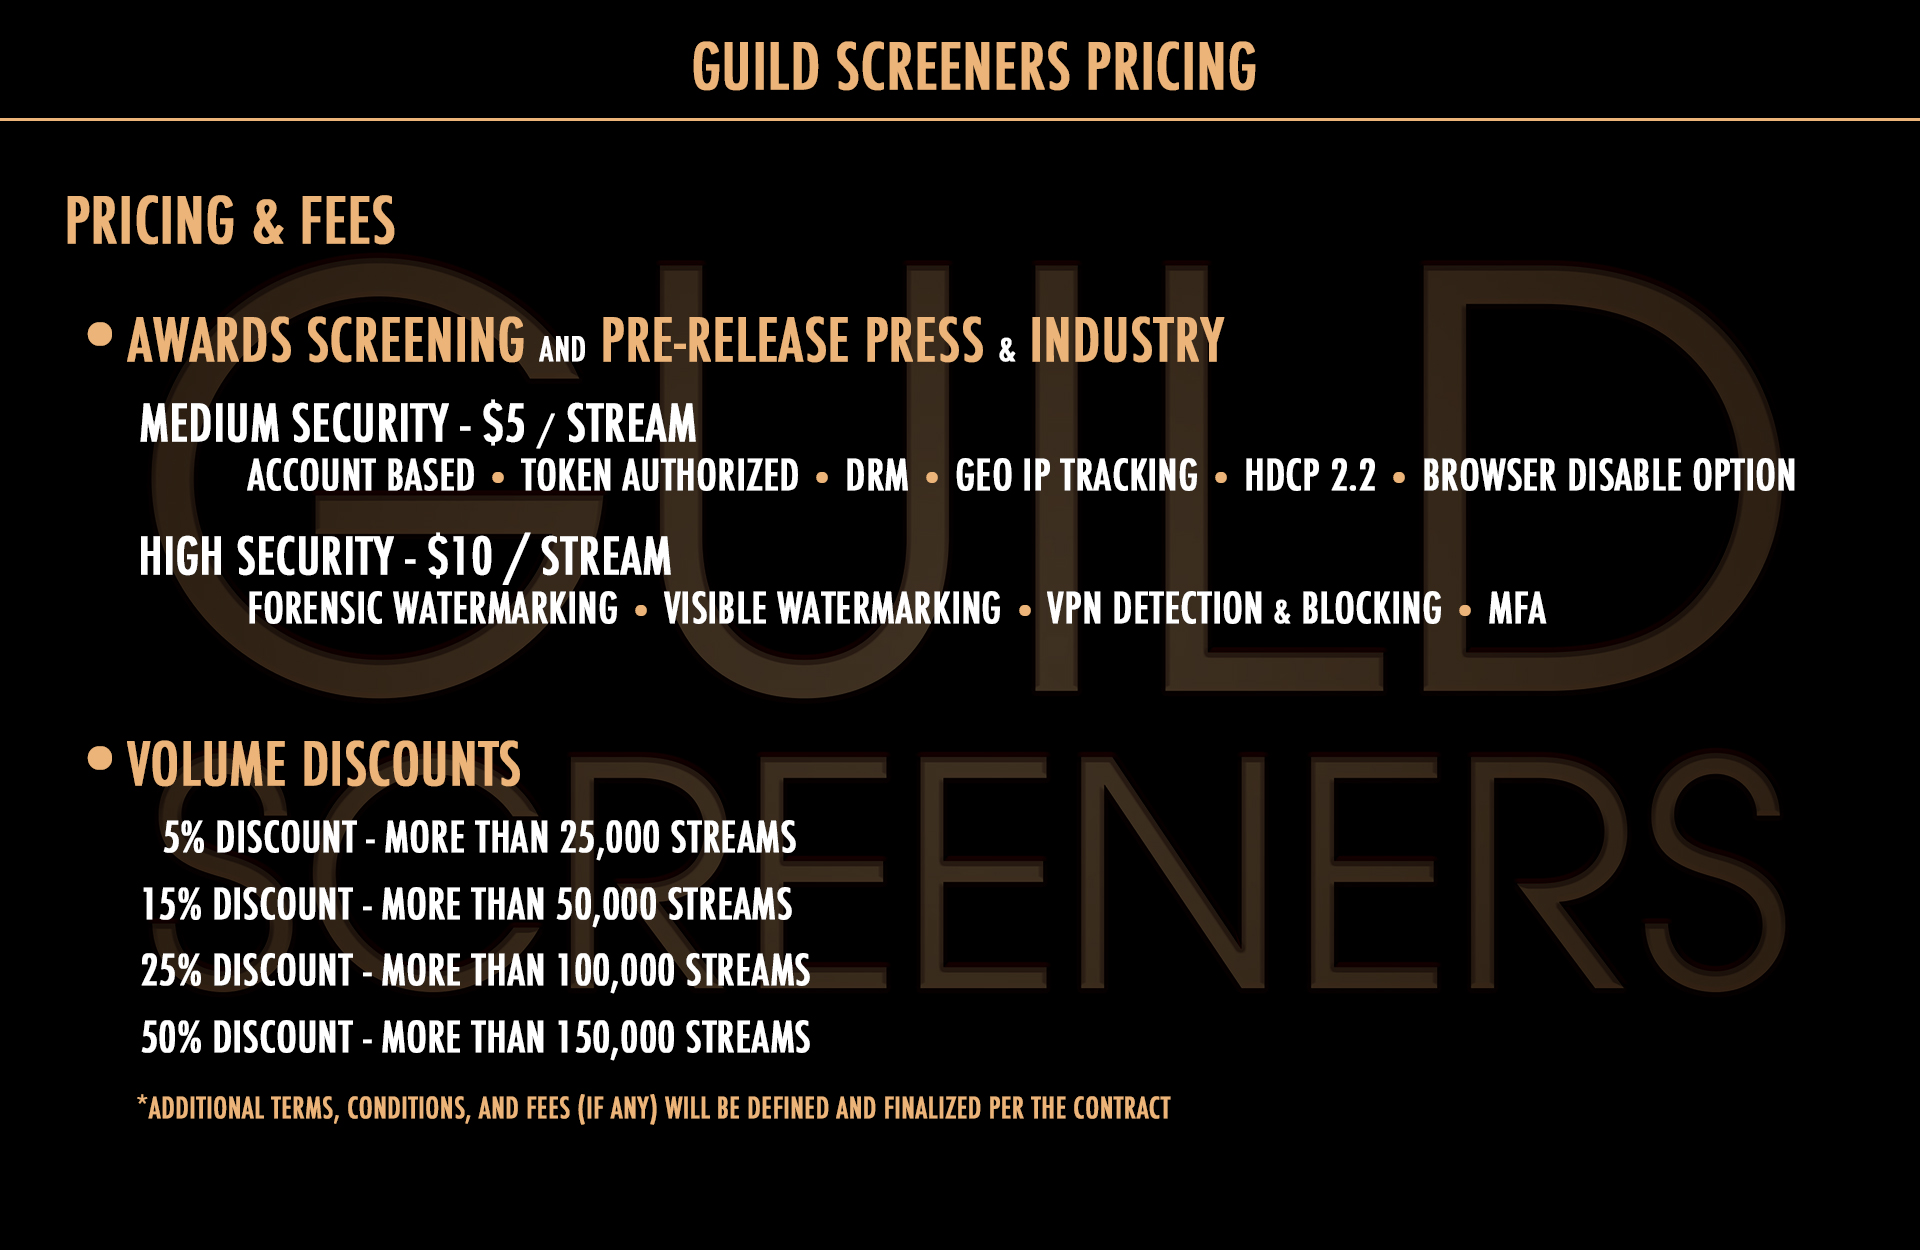 Guild Screeners Package Pricing. Discount Packages are available for volume use.